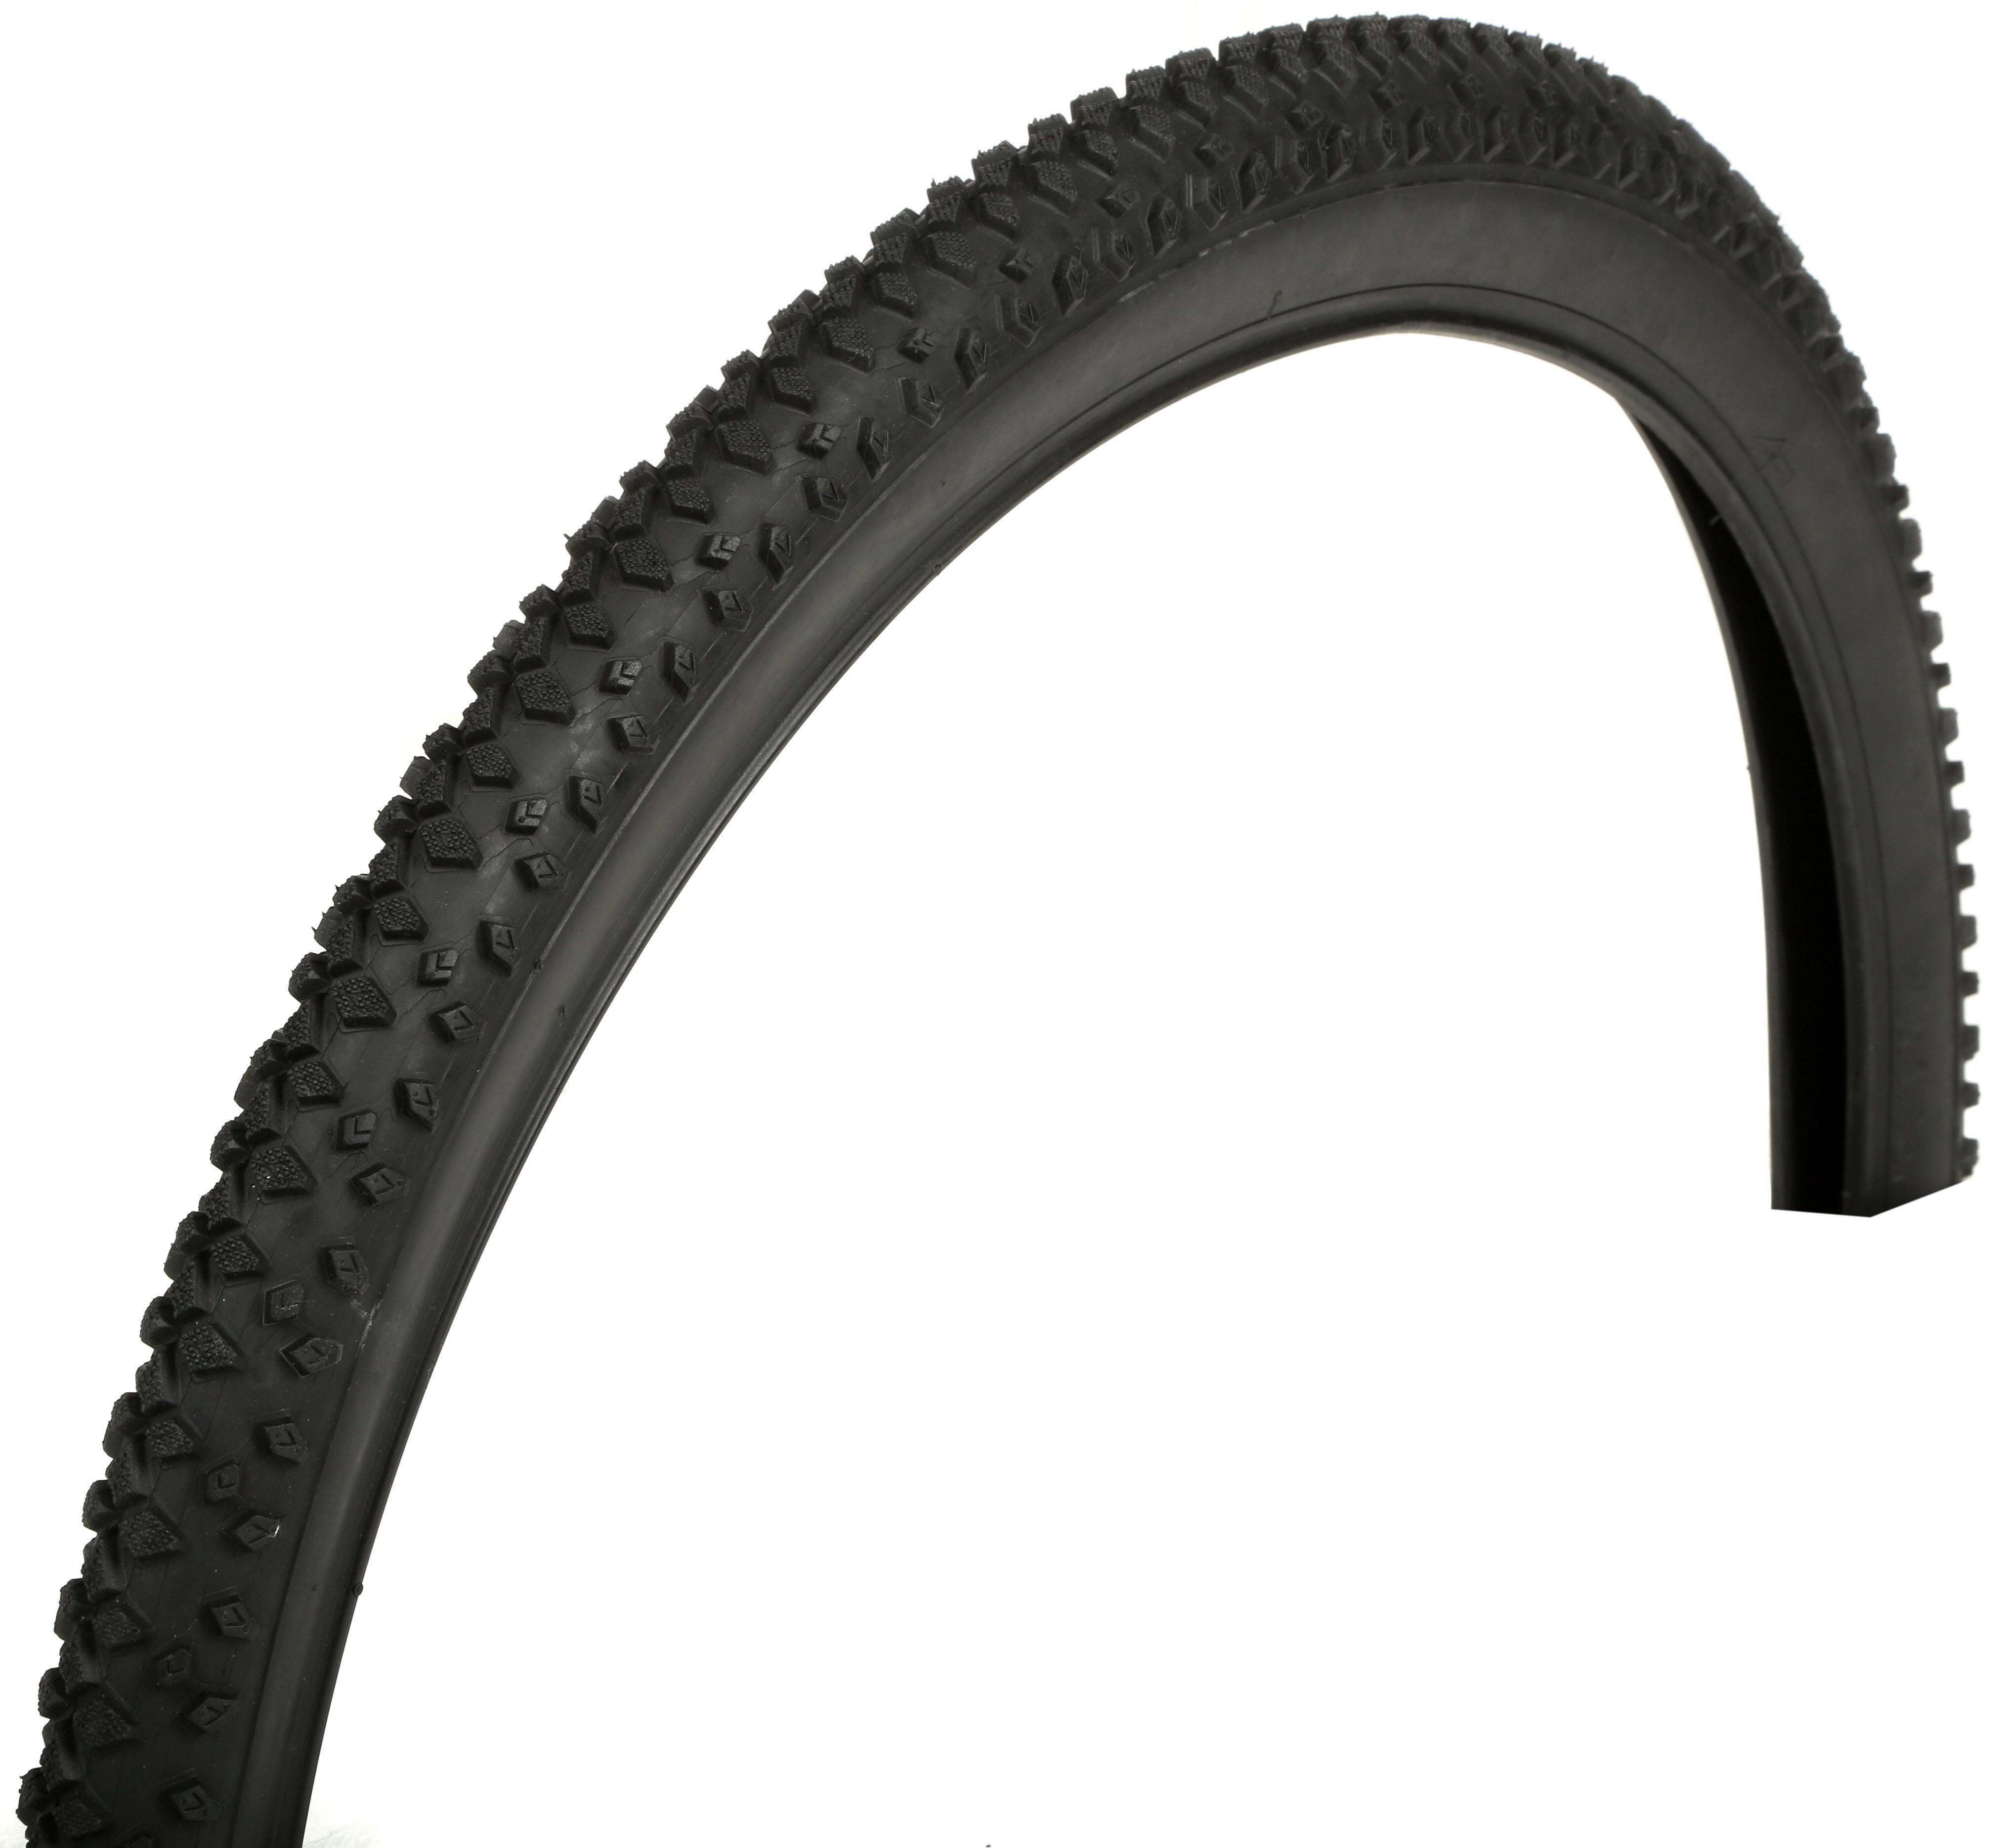 Bikehut Mtb Tyre 26 X 1.95 With Puncture Protect